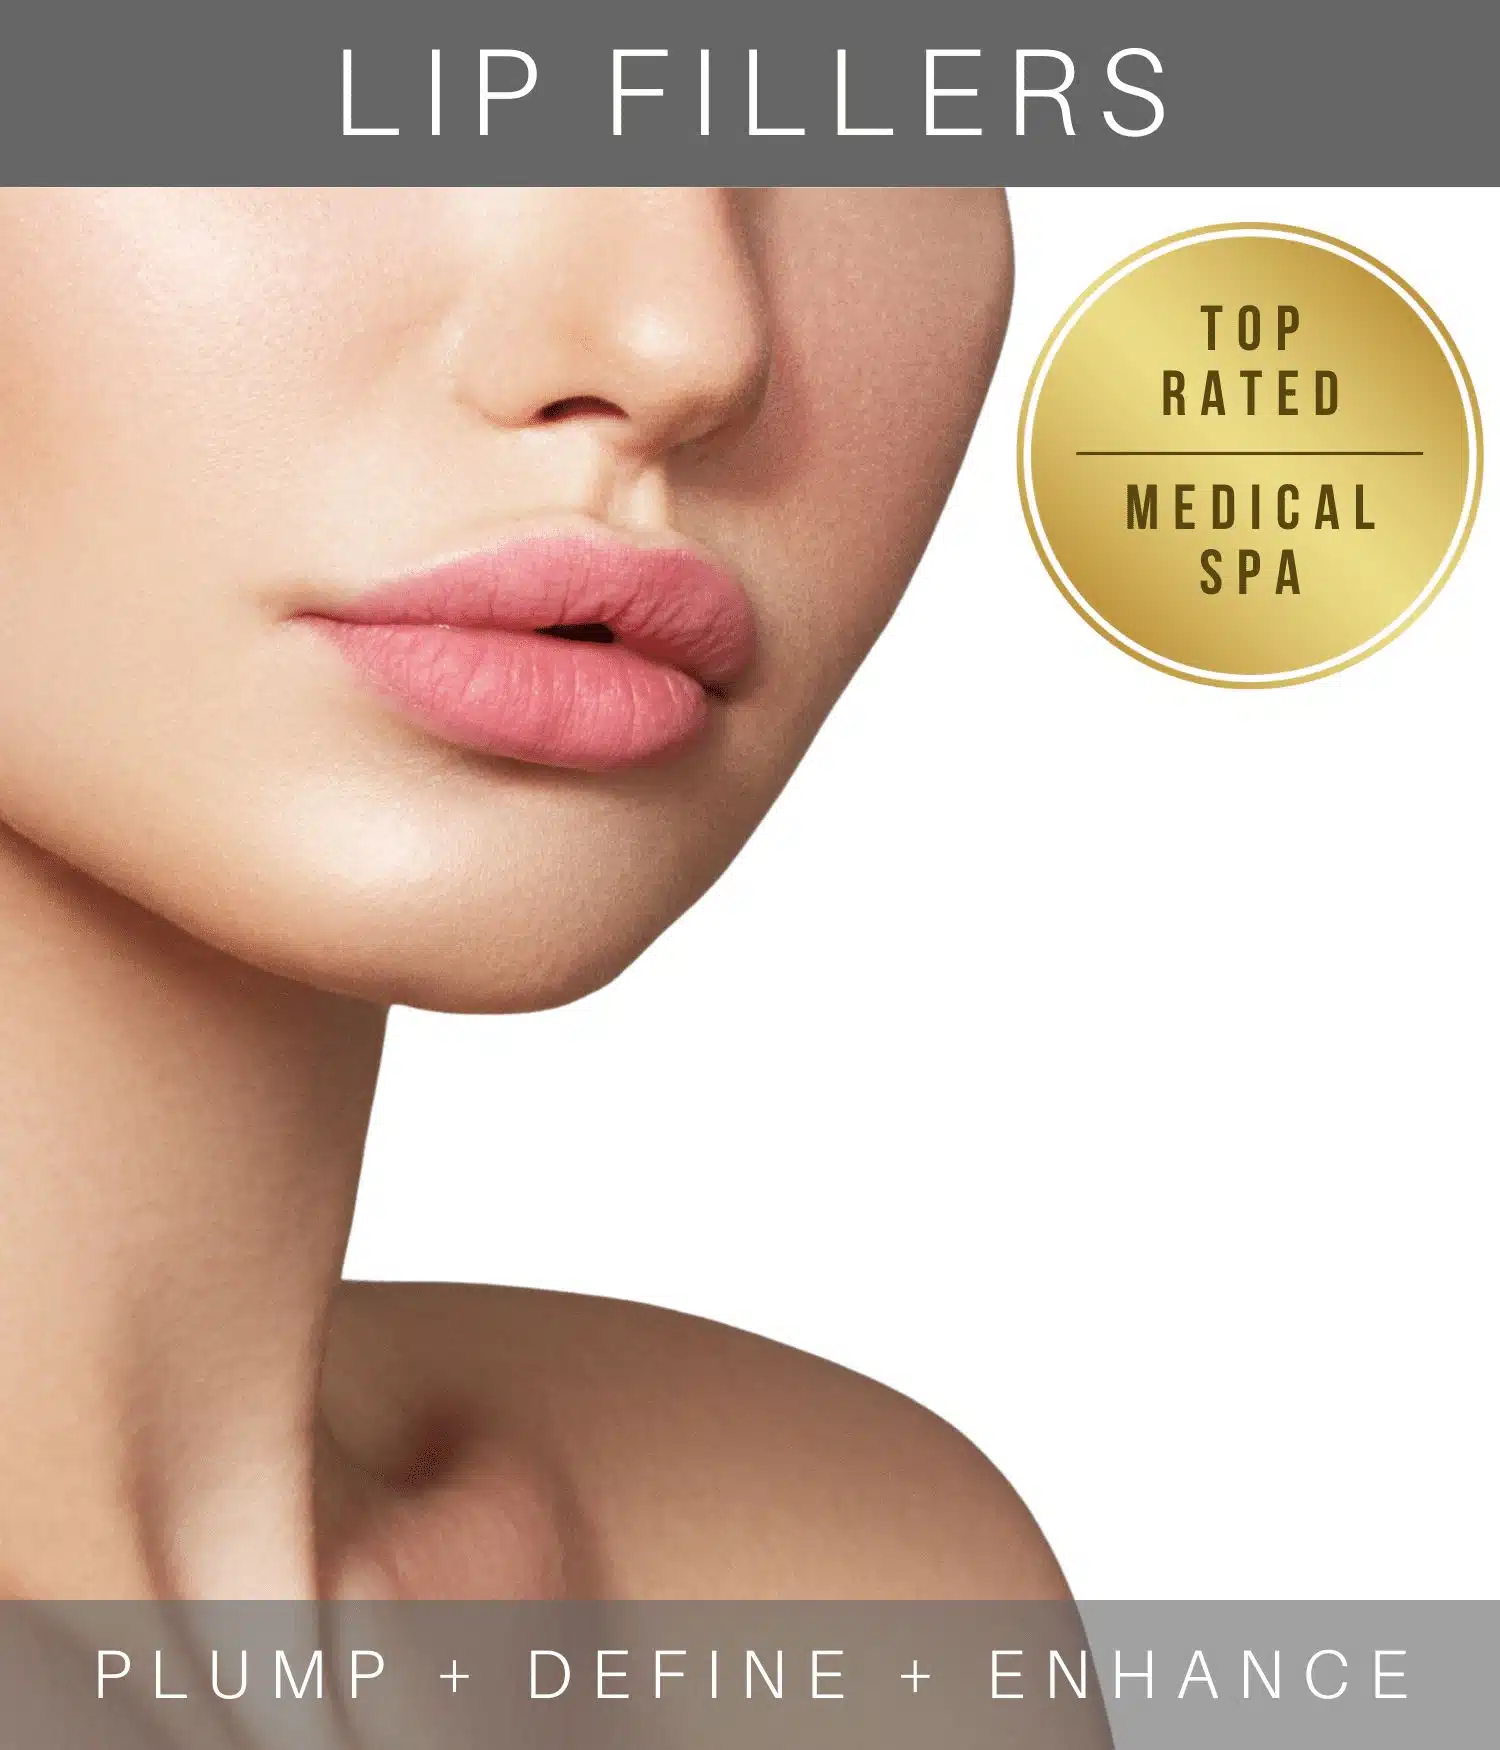 A beautiful woman with perfect pouty lips is promoting lip filler treatment in Naples, FL.